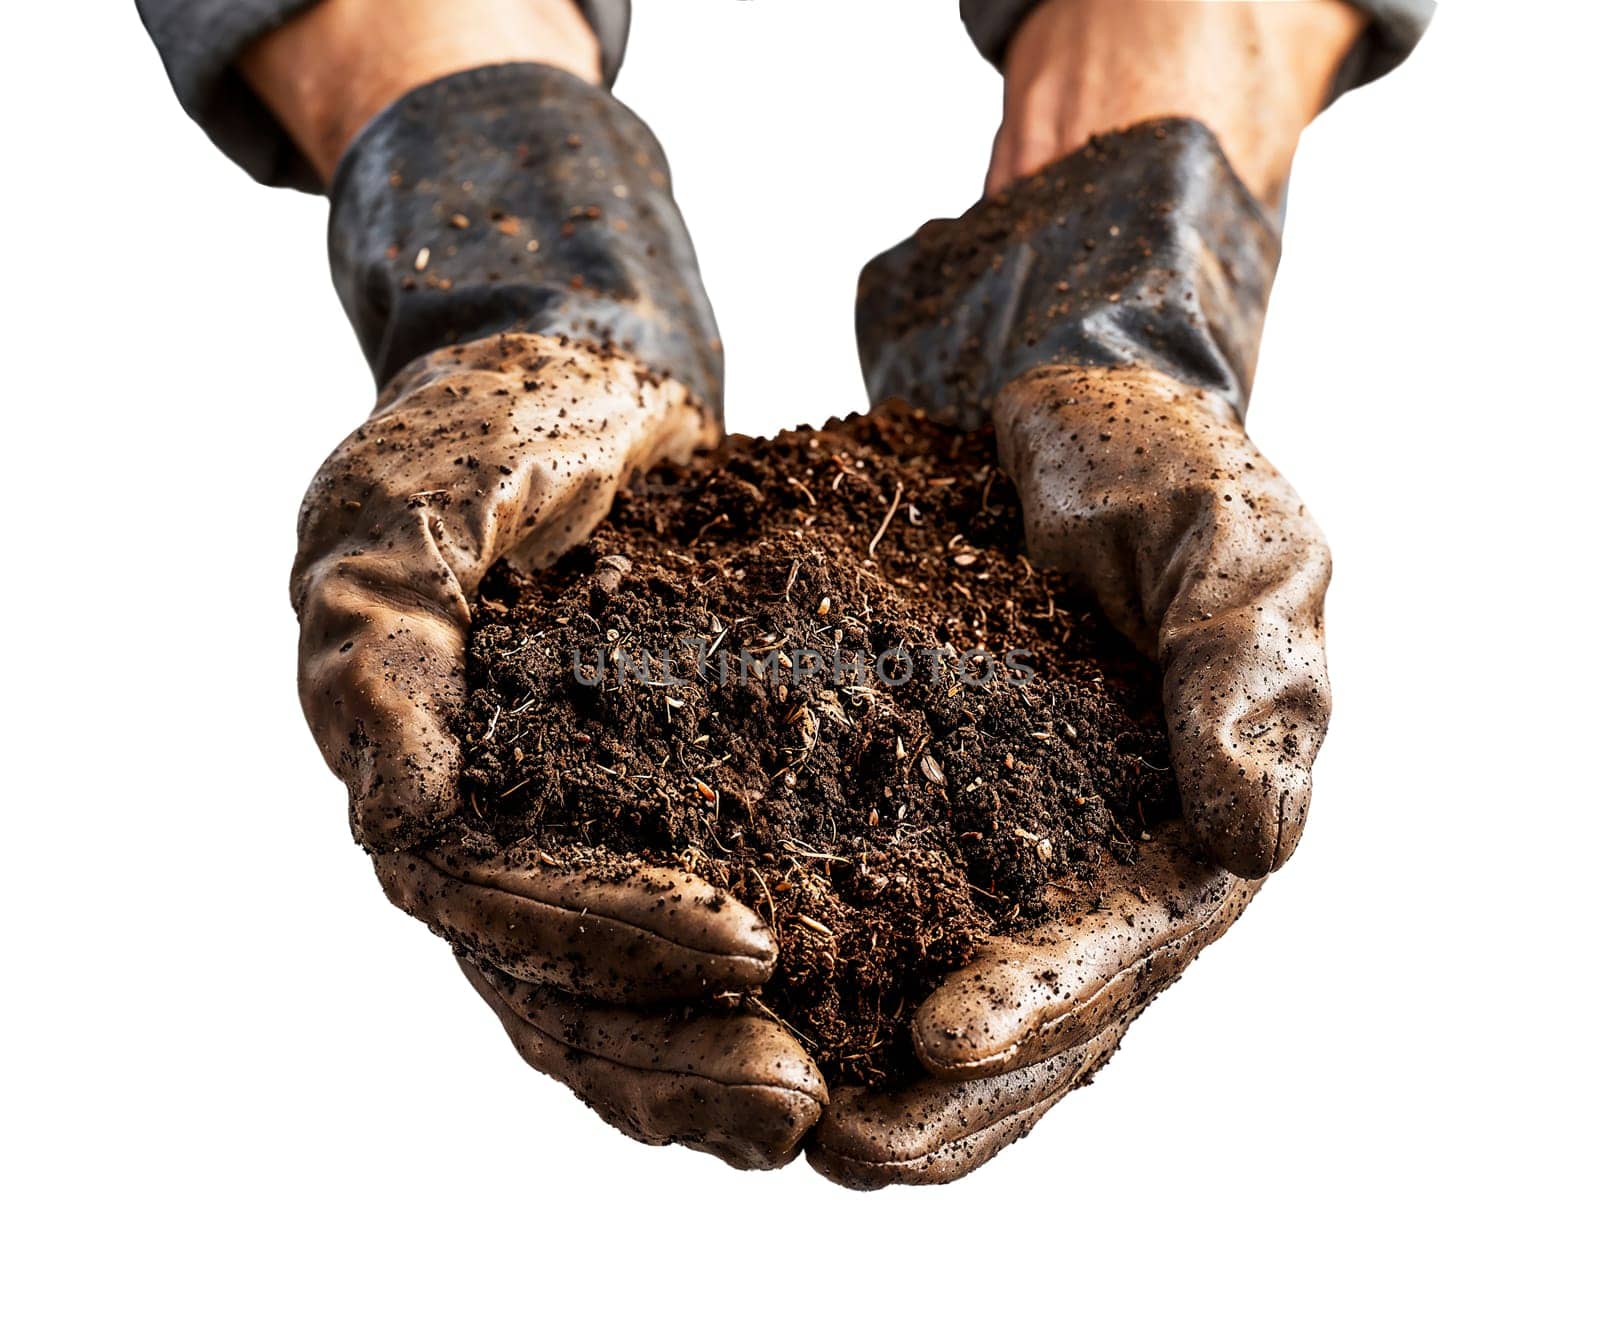 Farmers hands holding soil mixed with homemade compost isolated by evdakovka